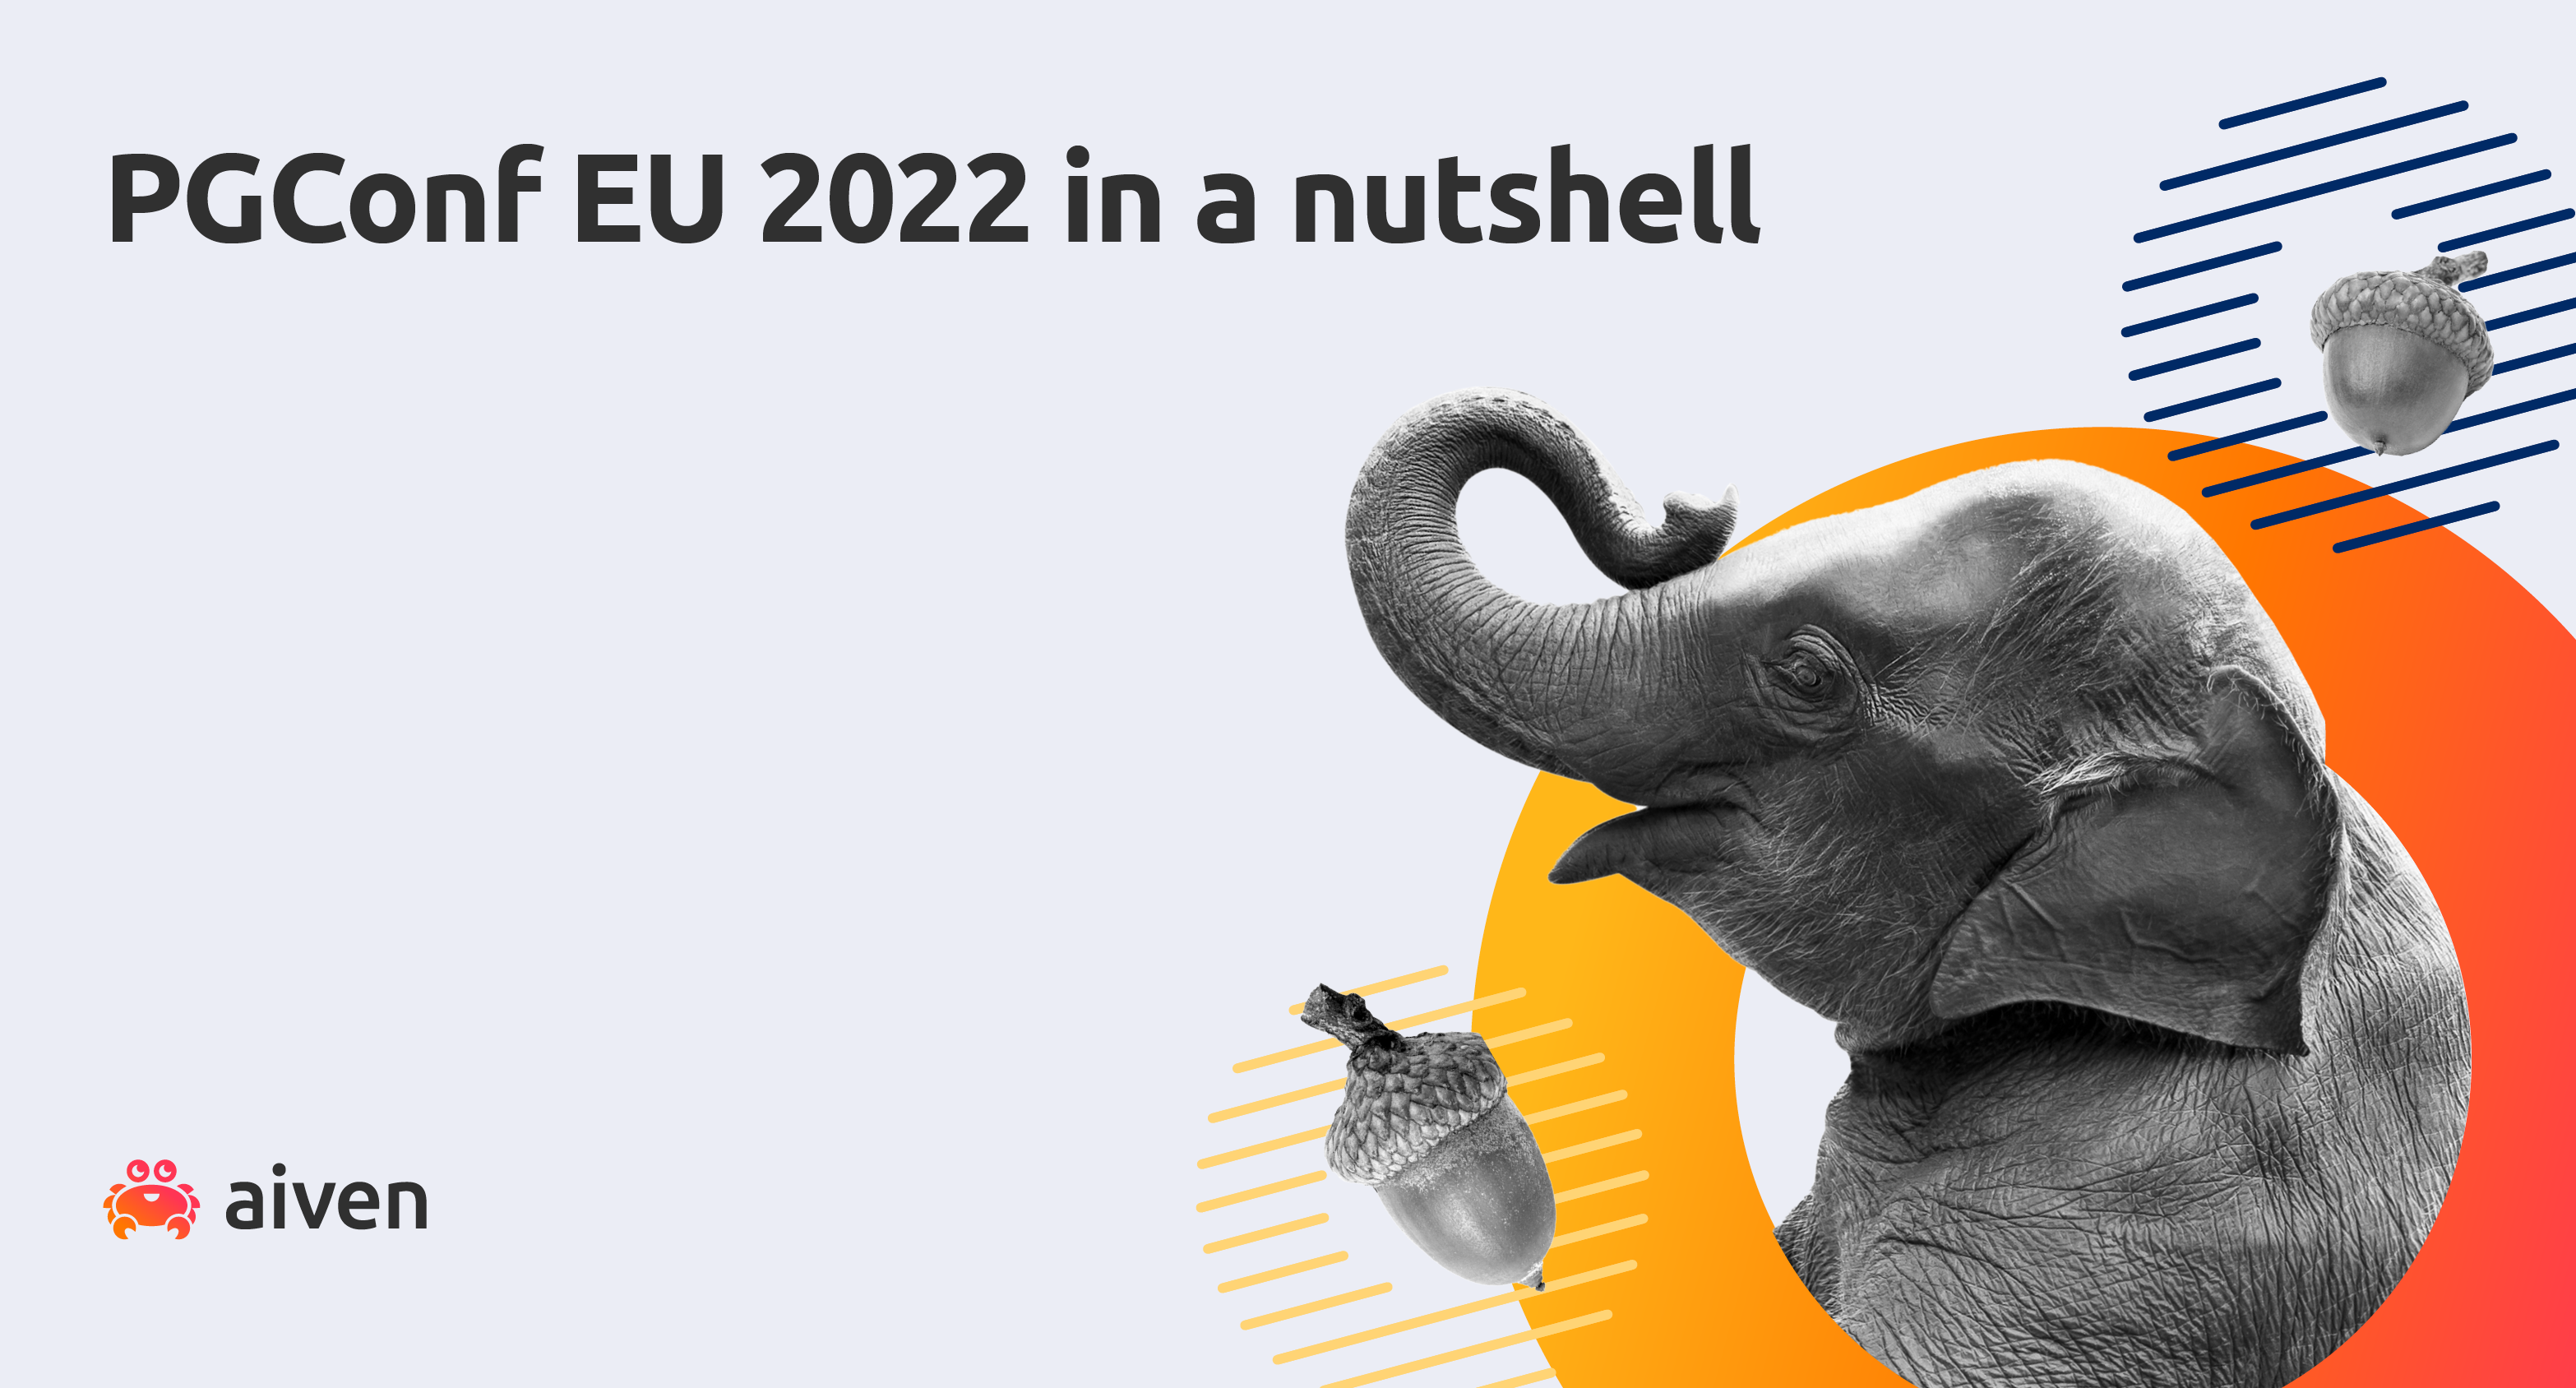 Text says "PGConf EU 2022 in a nutshell". And there's a picture of a happy elephant.